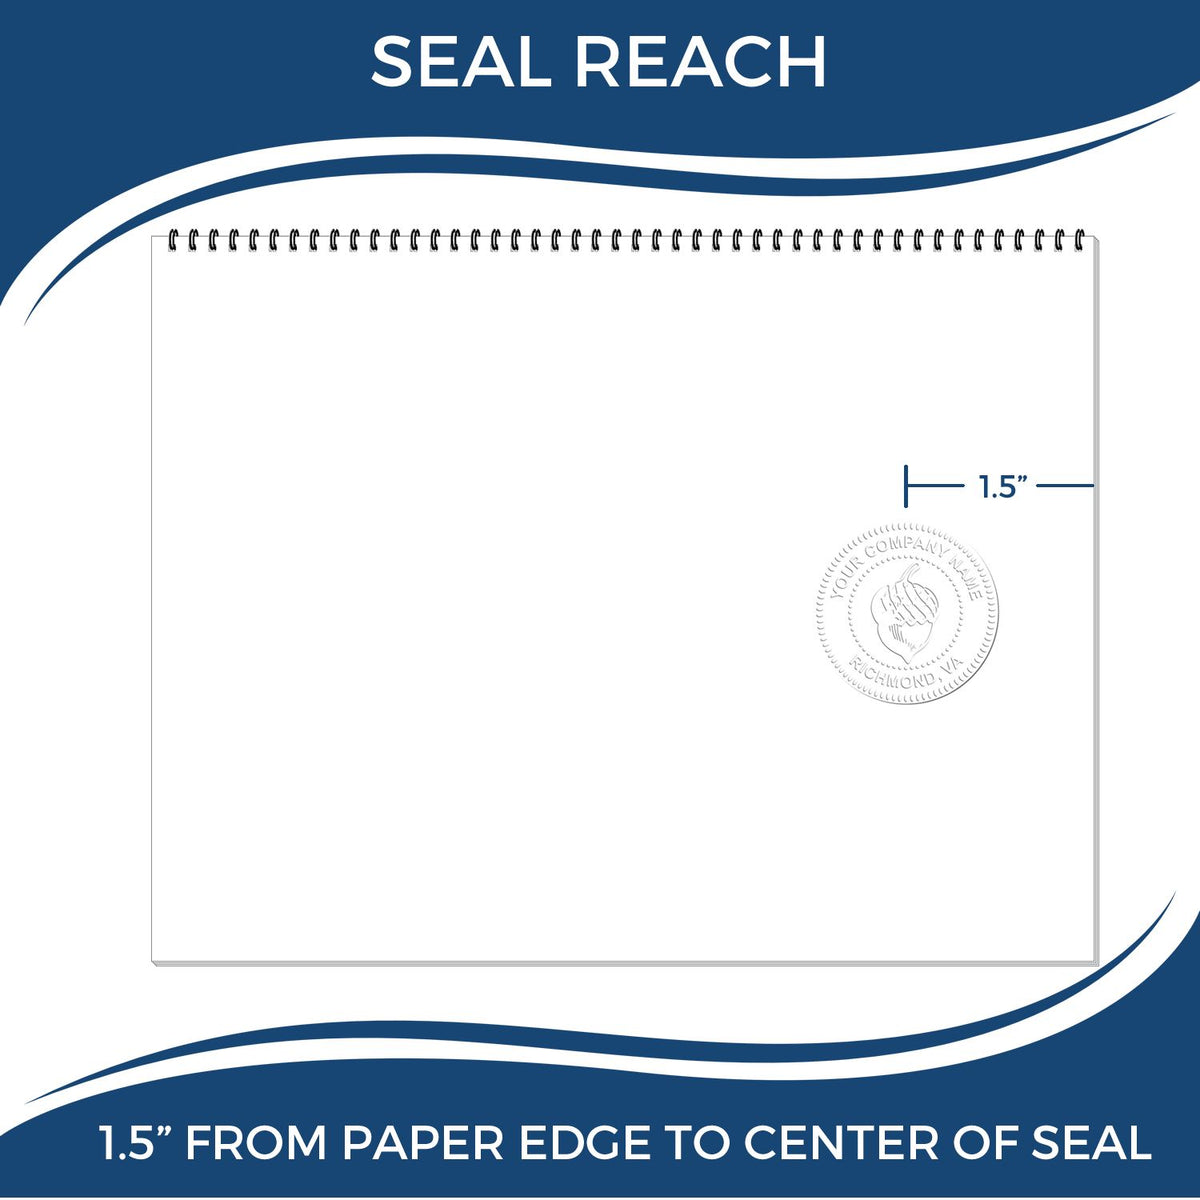 An infographic showing the seal reach which is represented by a ruler and a miniature seal image of the Gift Florida Landscape Architect Seal